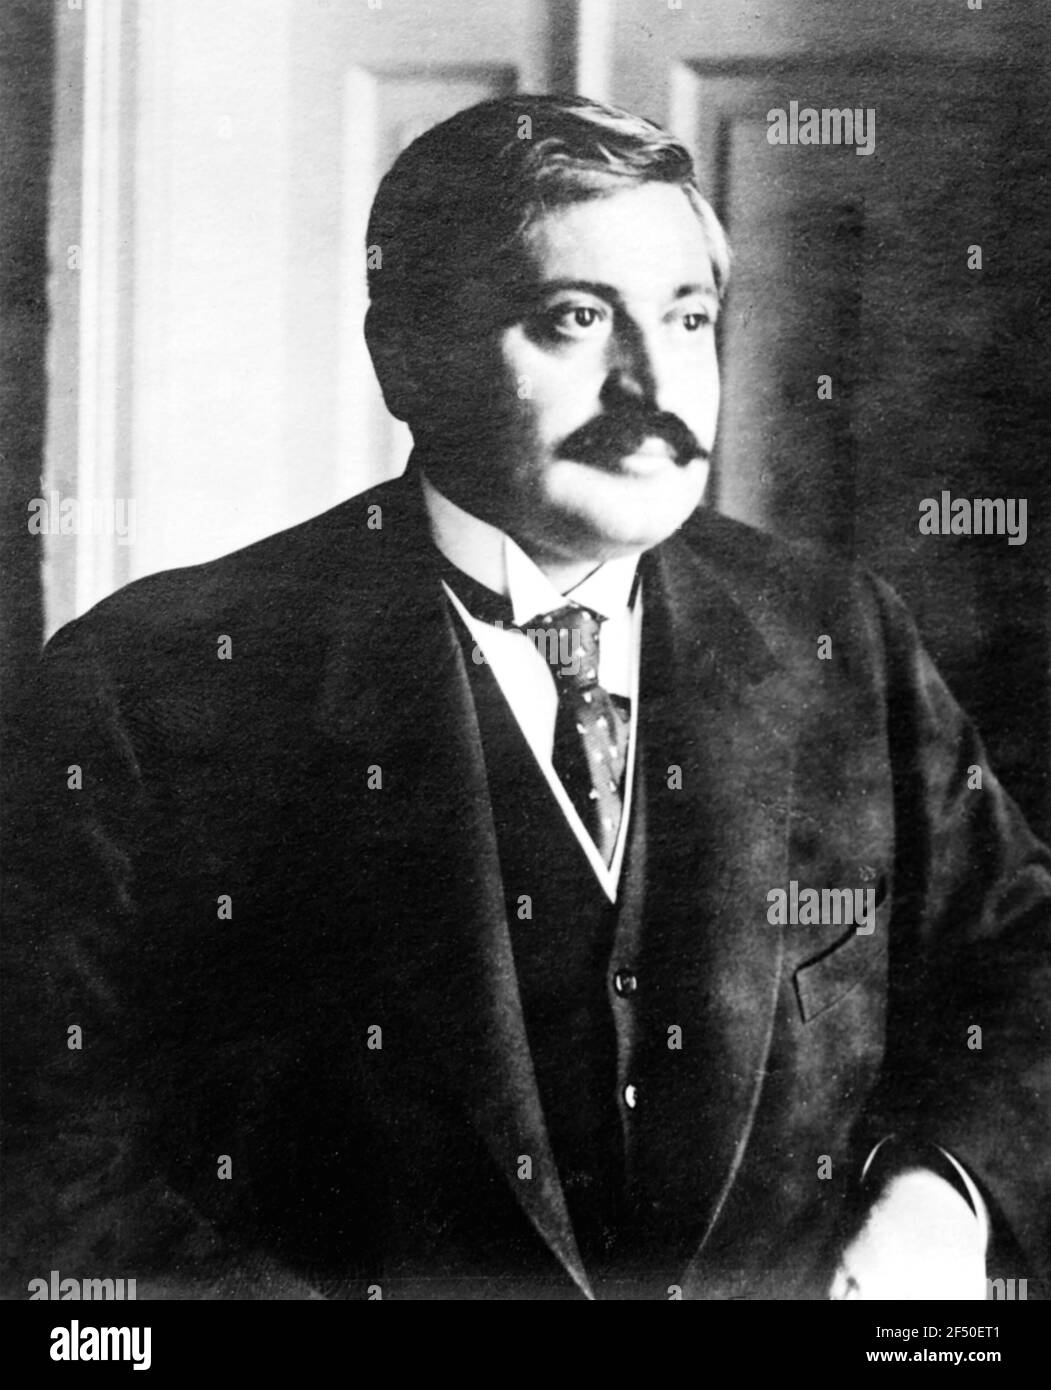 TALAAT PASHA (1874-1921) One of the nthree Pasha who ruled the Ottoman Empire during the First World War and responsible for the Armenian Massacres in 1915. Photo: Baines News Service Stock Photo